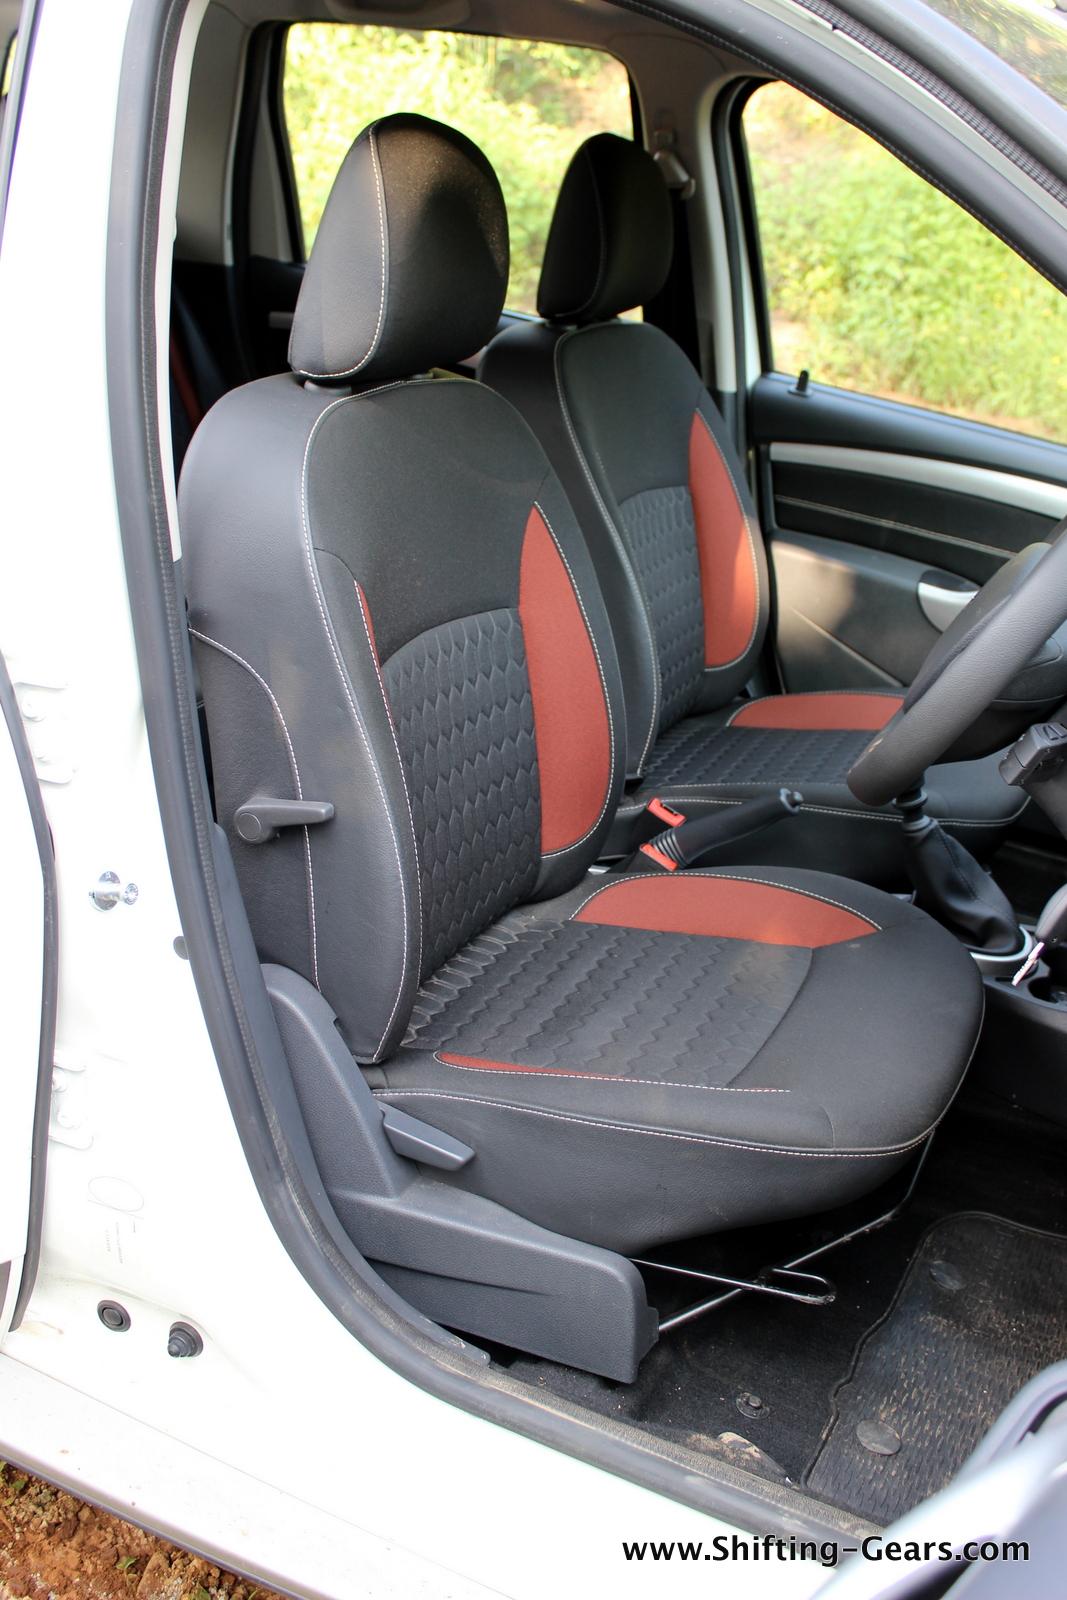 Red and black seat upholstery is standard on the AWD variants